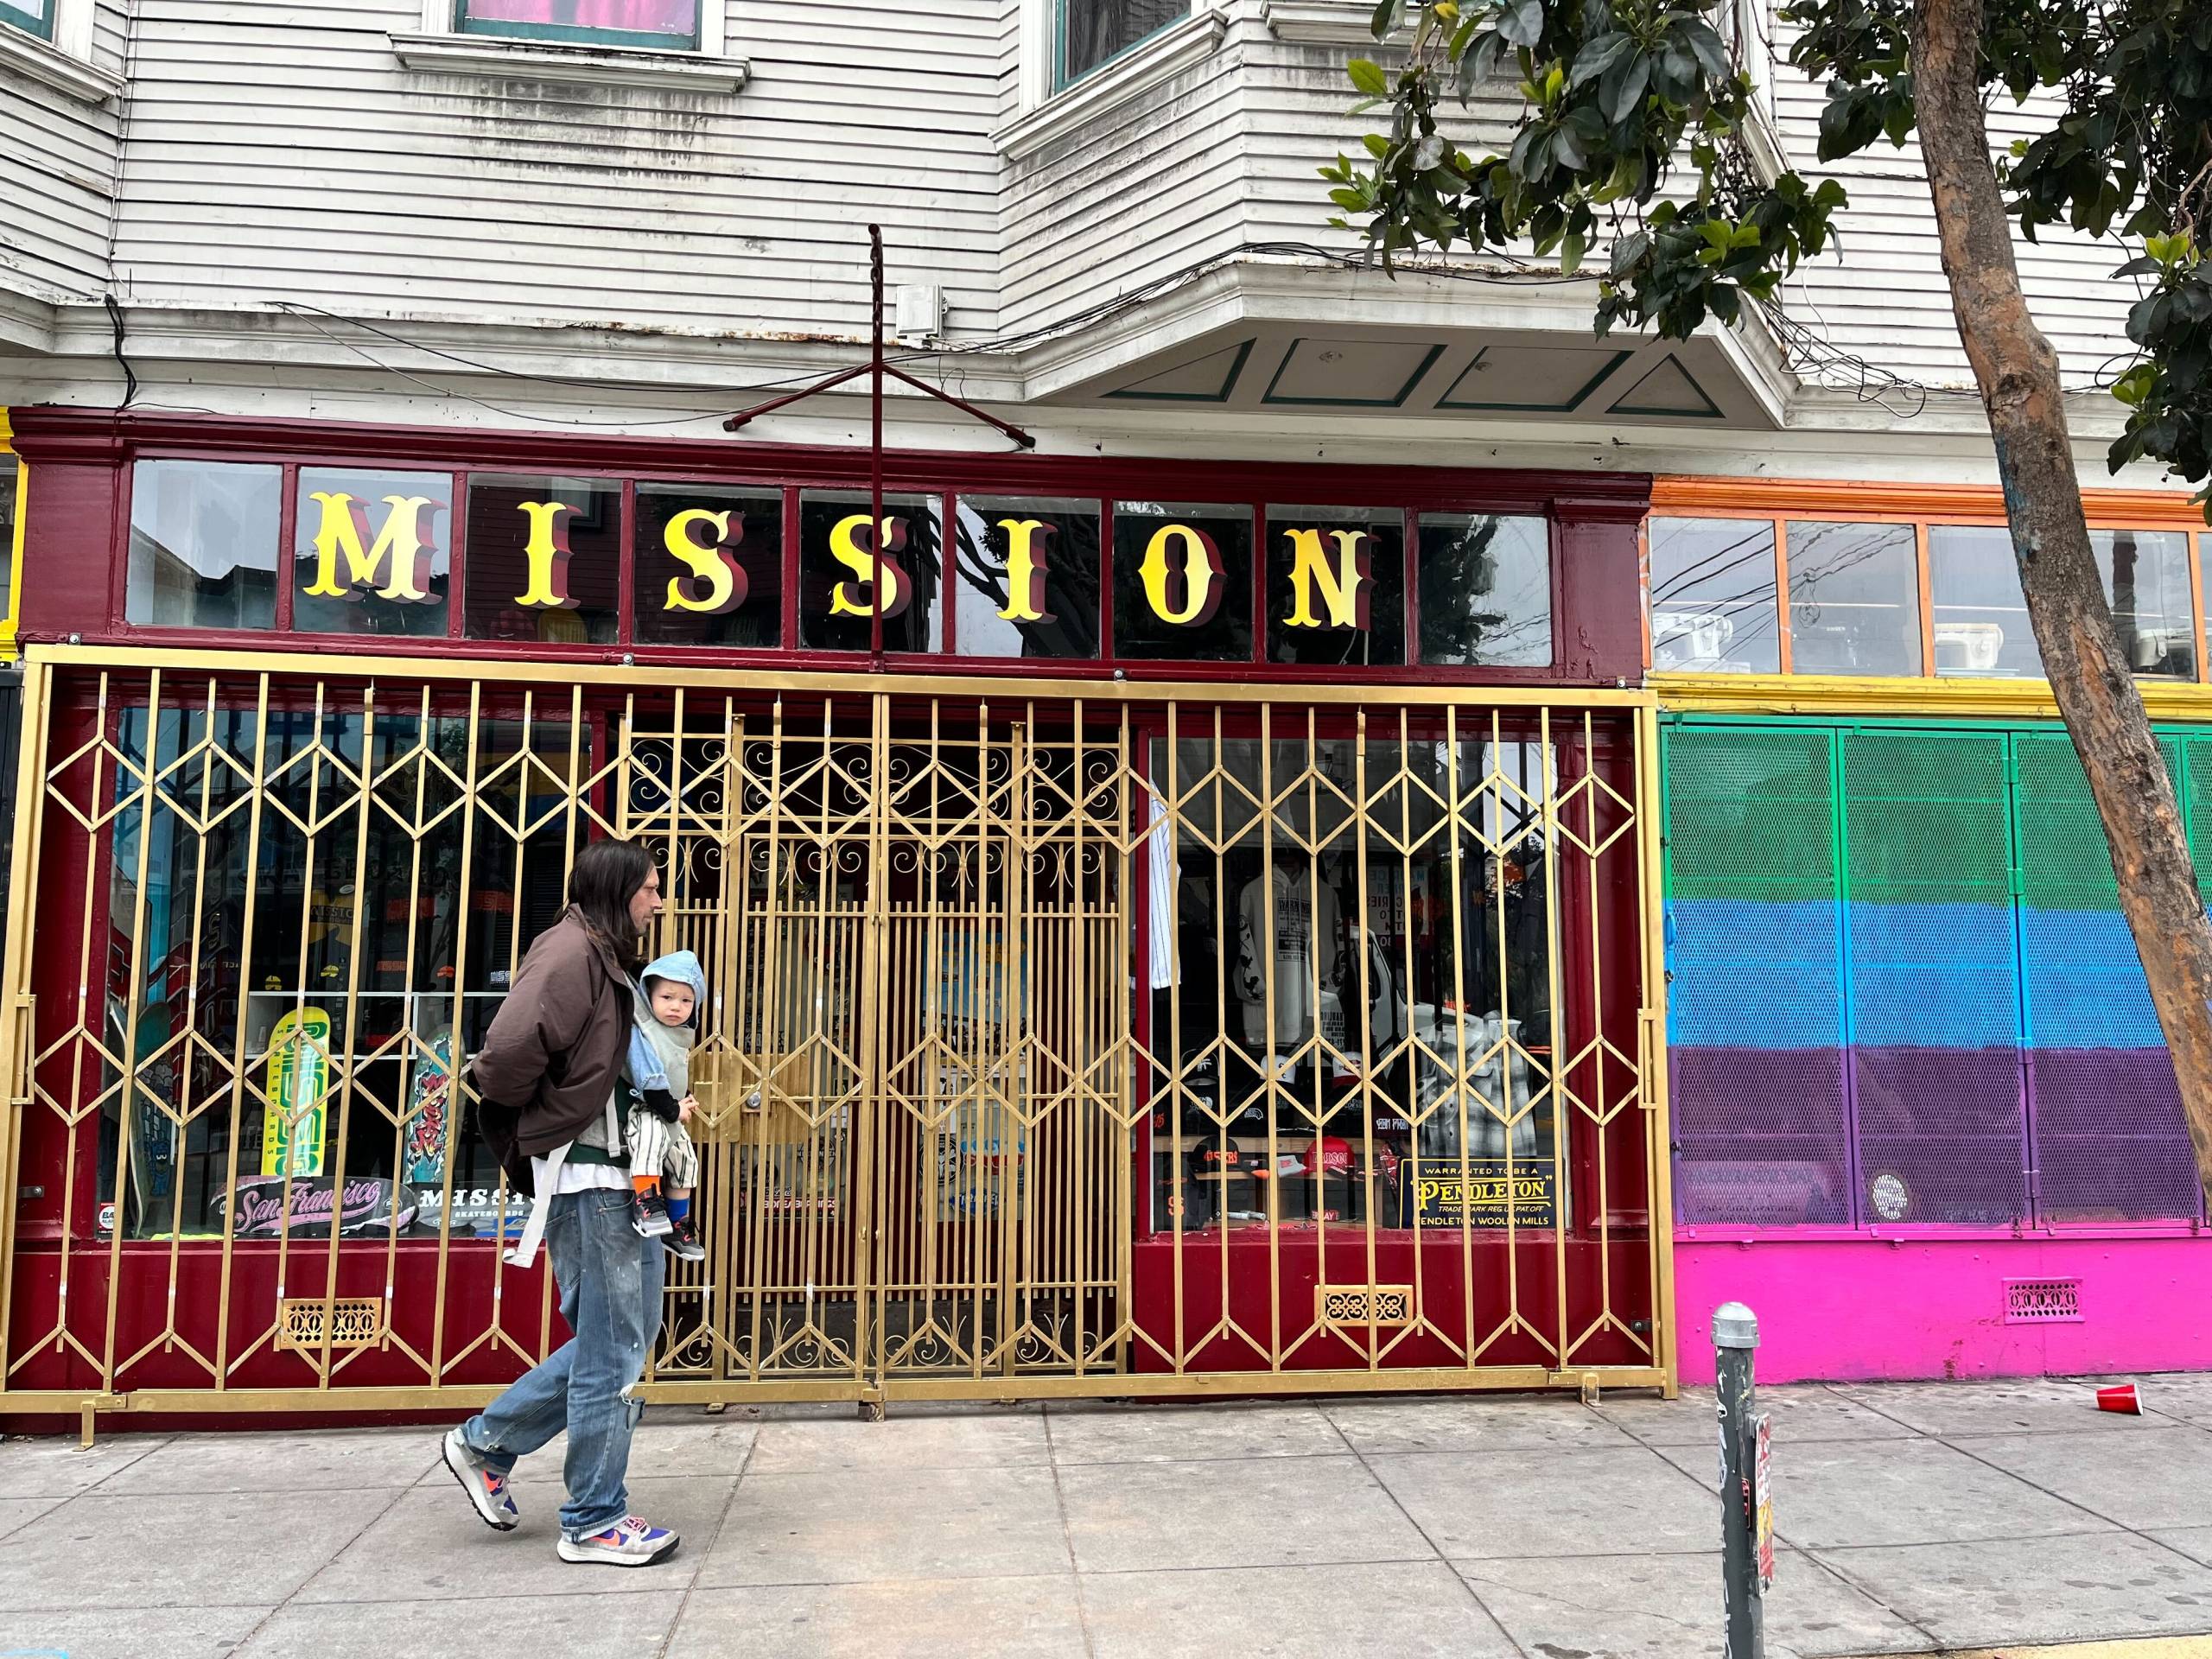 A closed storefront with "Mission" written over the main window, and a man with a toddler walking by.